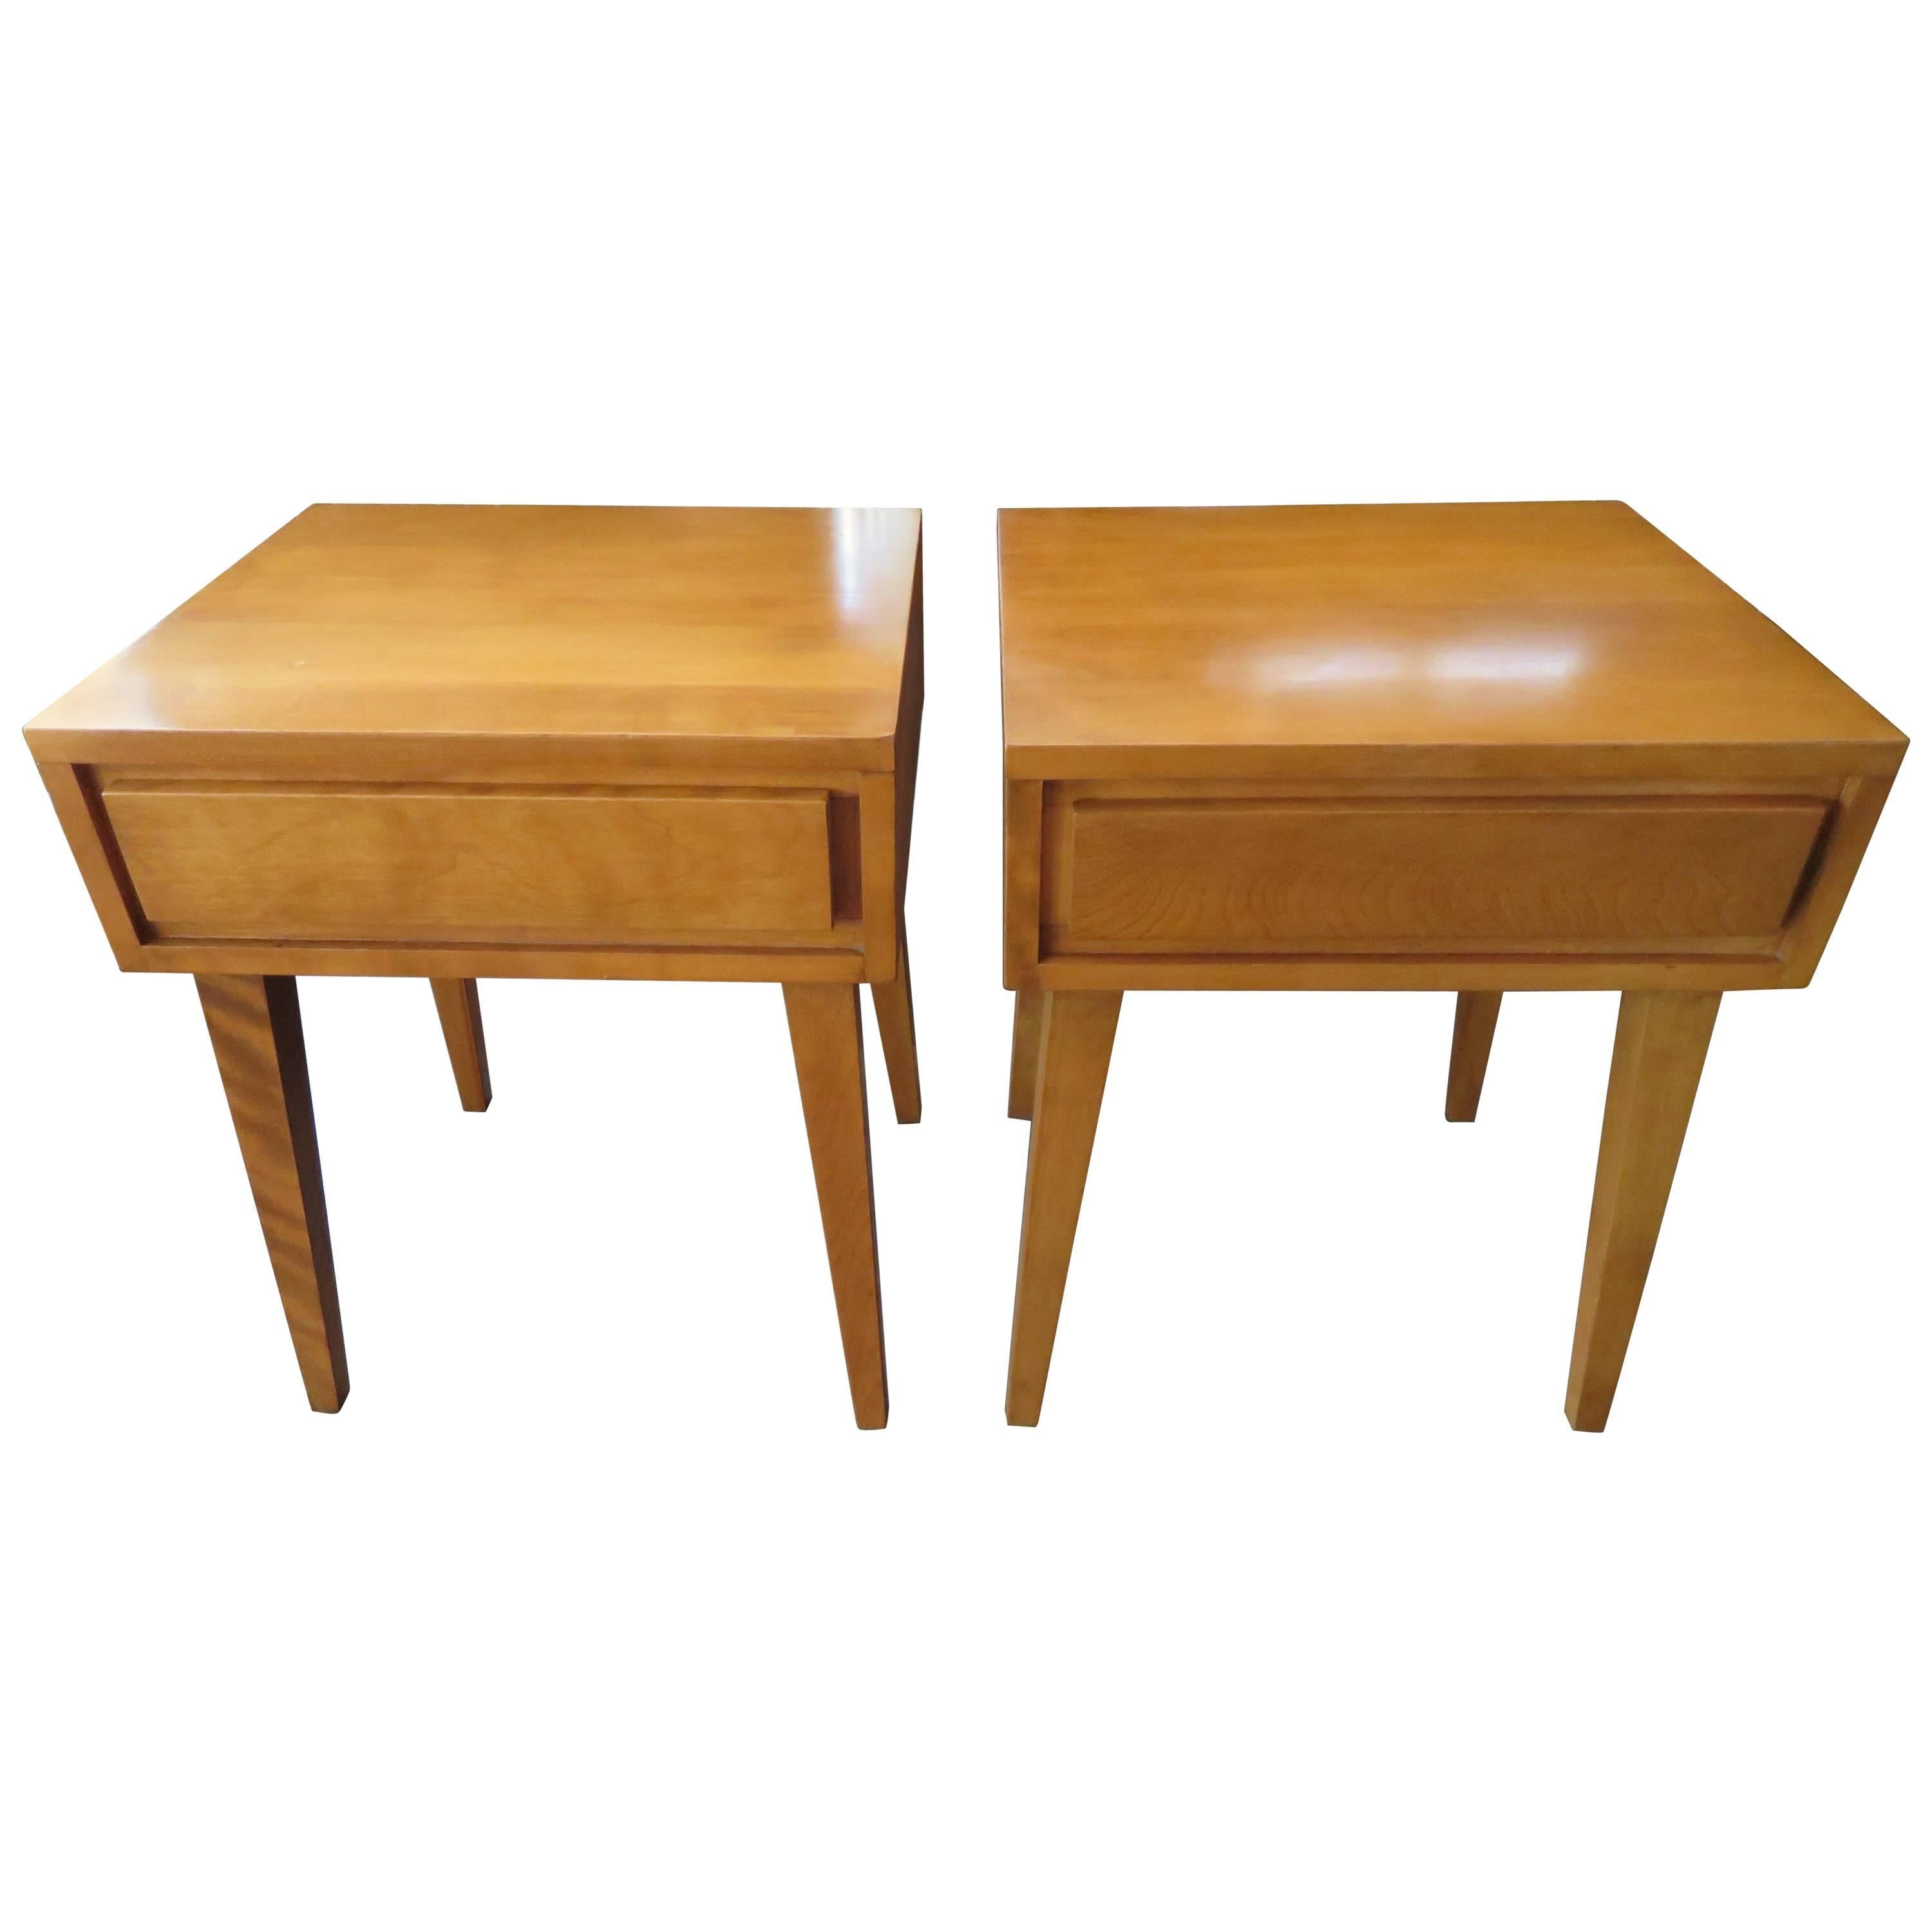 Lovely Pair of Conant Ball Maple Nightstand Tables, Mid-Century Modern For Sale